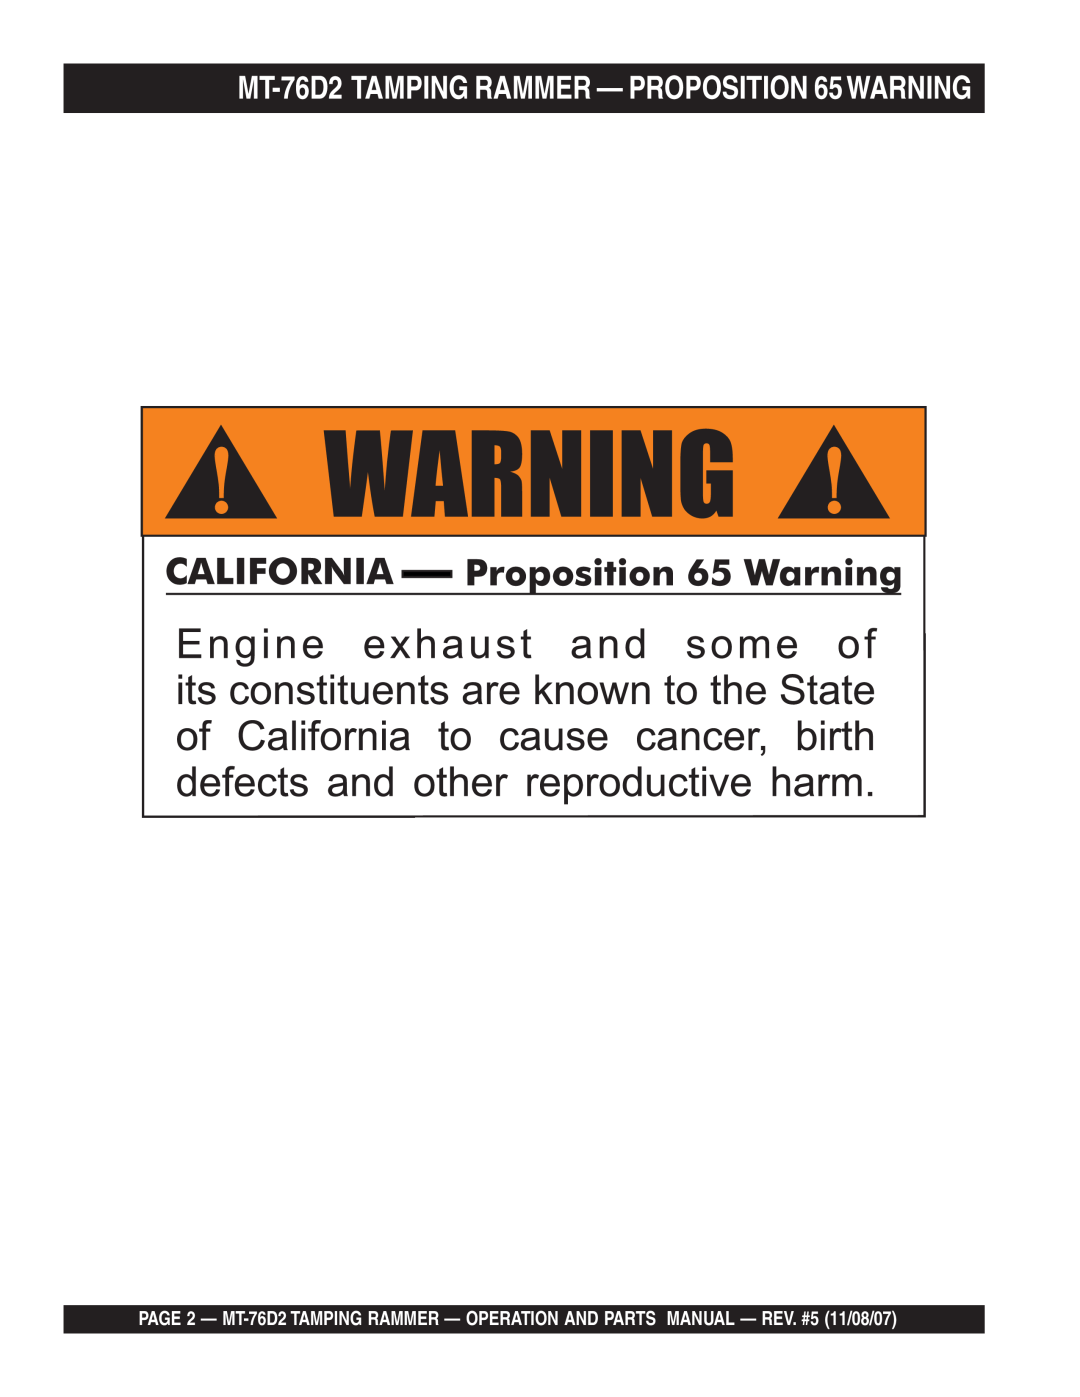 Multiquip manual MT-76D2 TAMPING RAMMER - PROPOSITION 65WARNING 